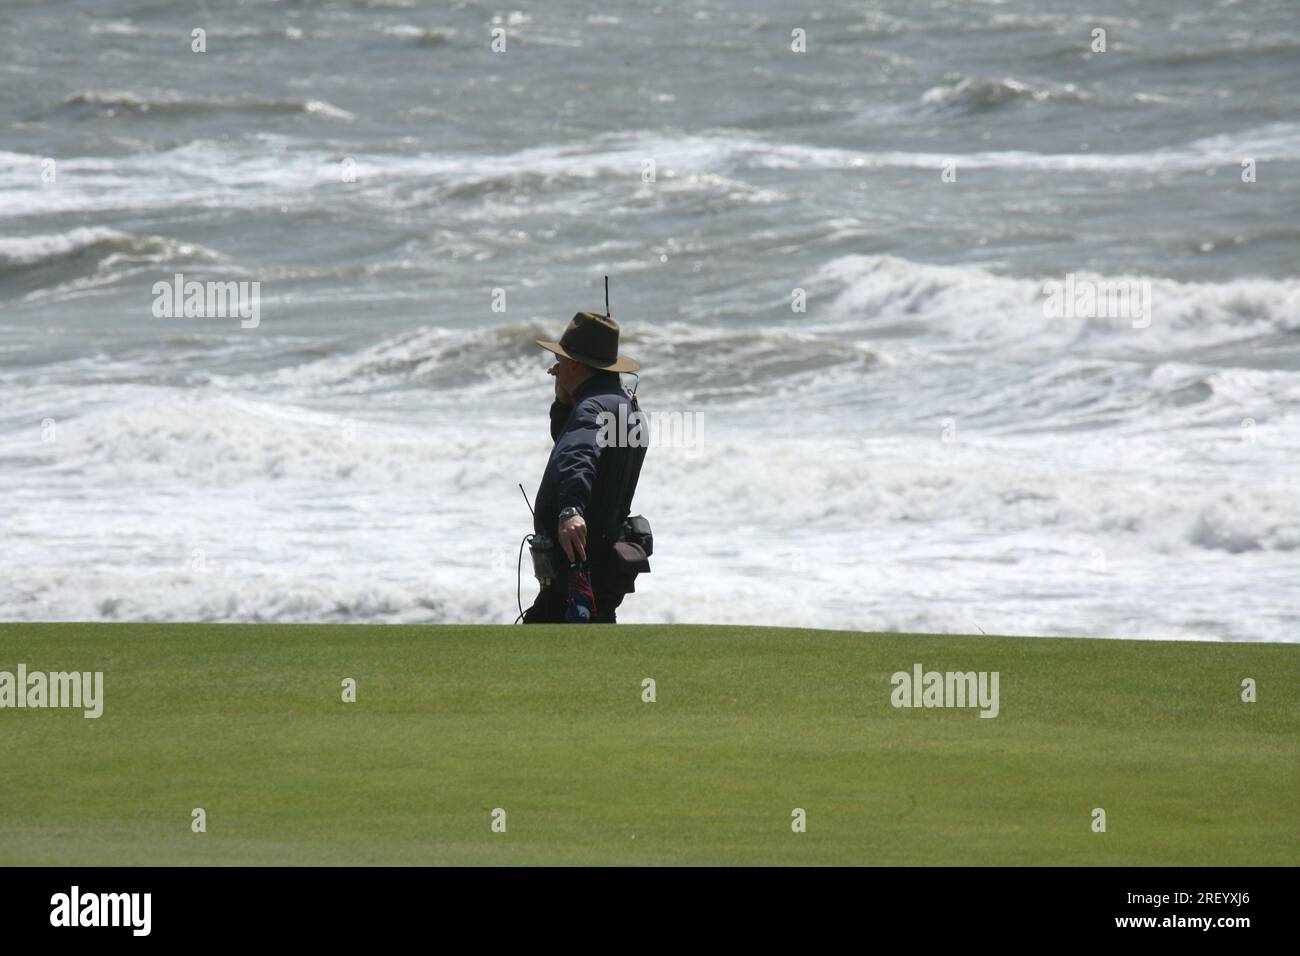 "The Seniors Open", "Golf", "Royal Porthcawl GC", "Wales 2023", "Golfing legends",  "at play in the wind and rain", "Links Golf at its cruellest" Stock Photo